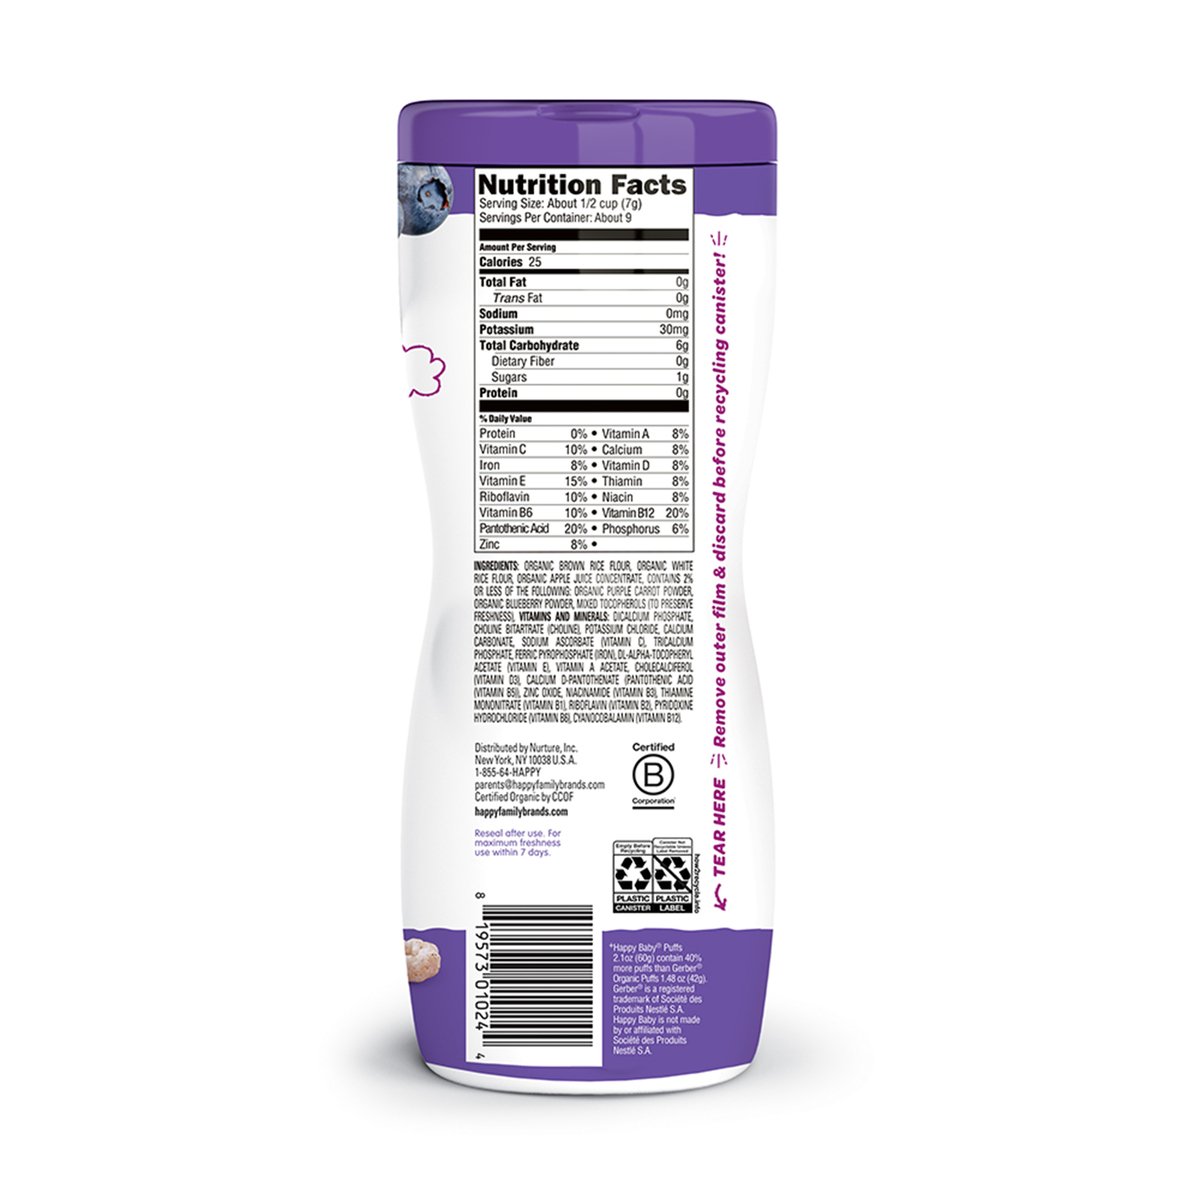 Happy Baby Purple Carrot & Blueberry Organics Superfood Puffs 60 g